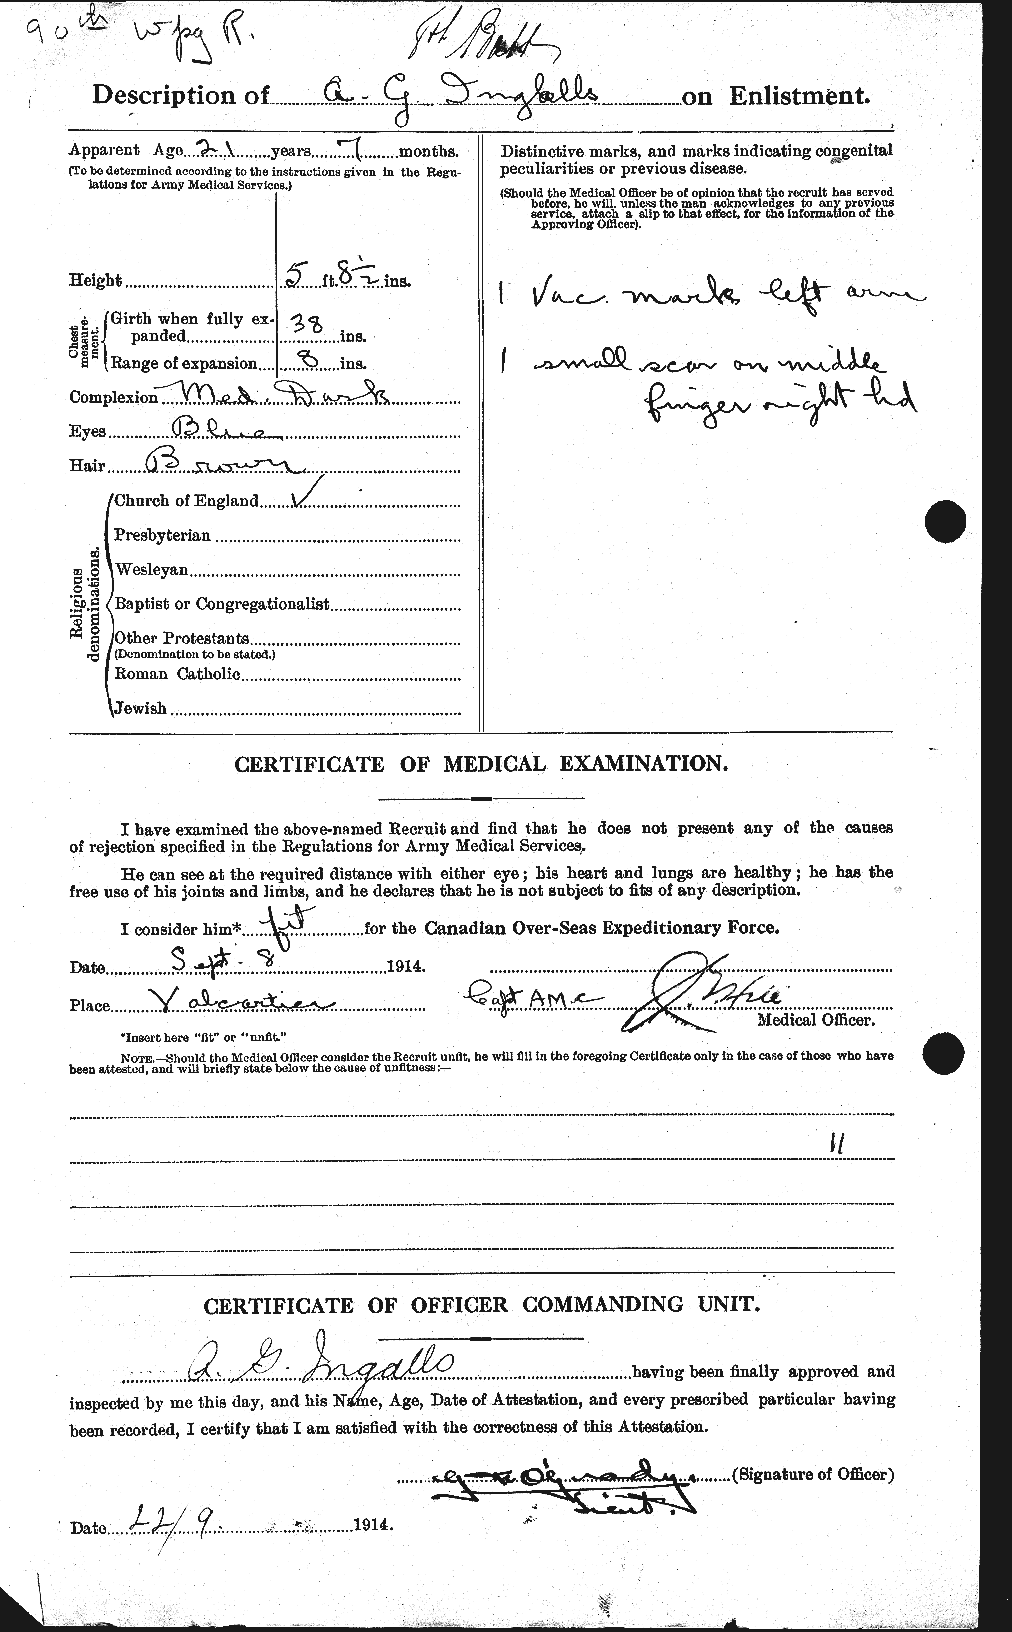 Personnel Records of the First World War - CEF 414903b